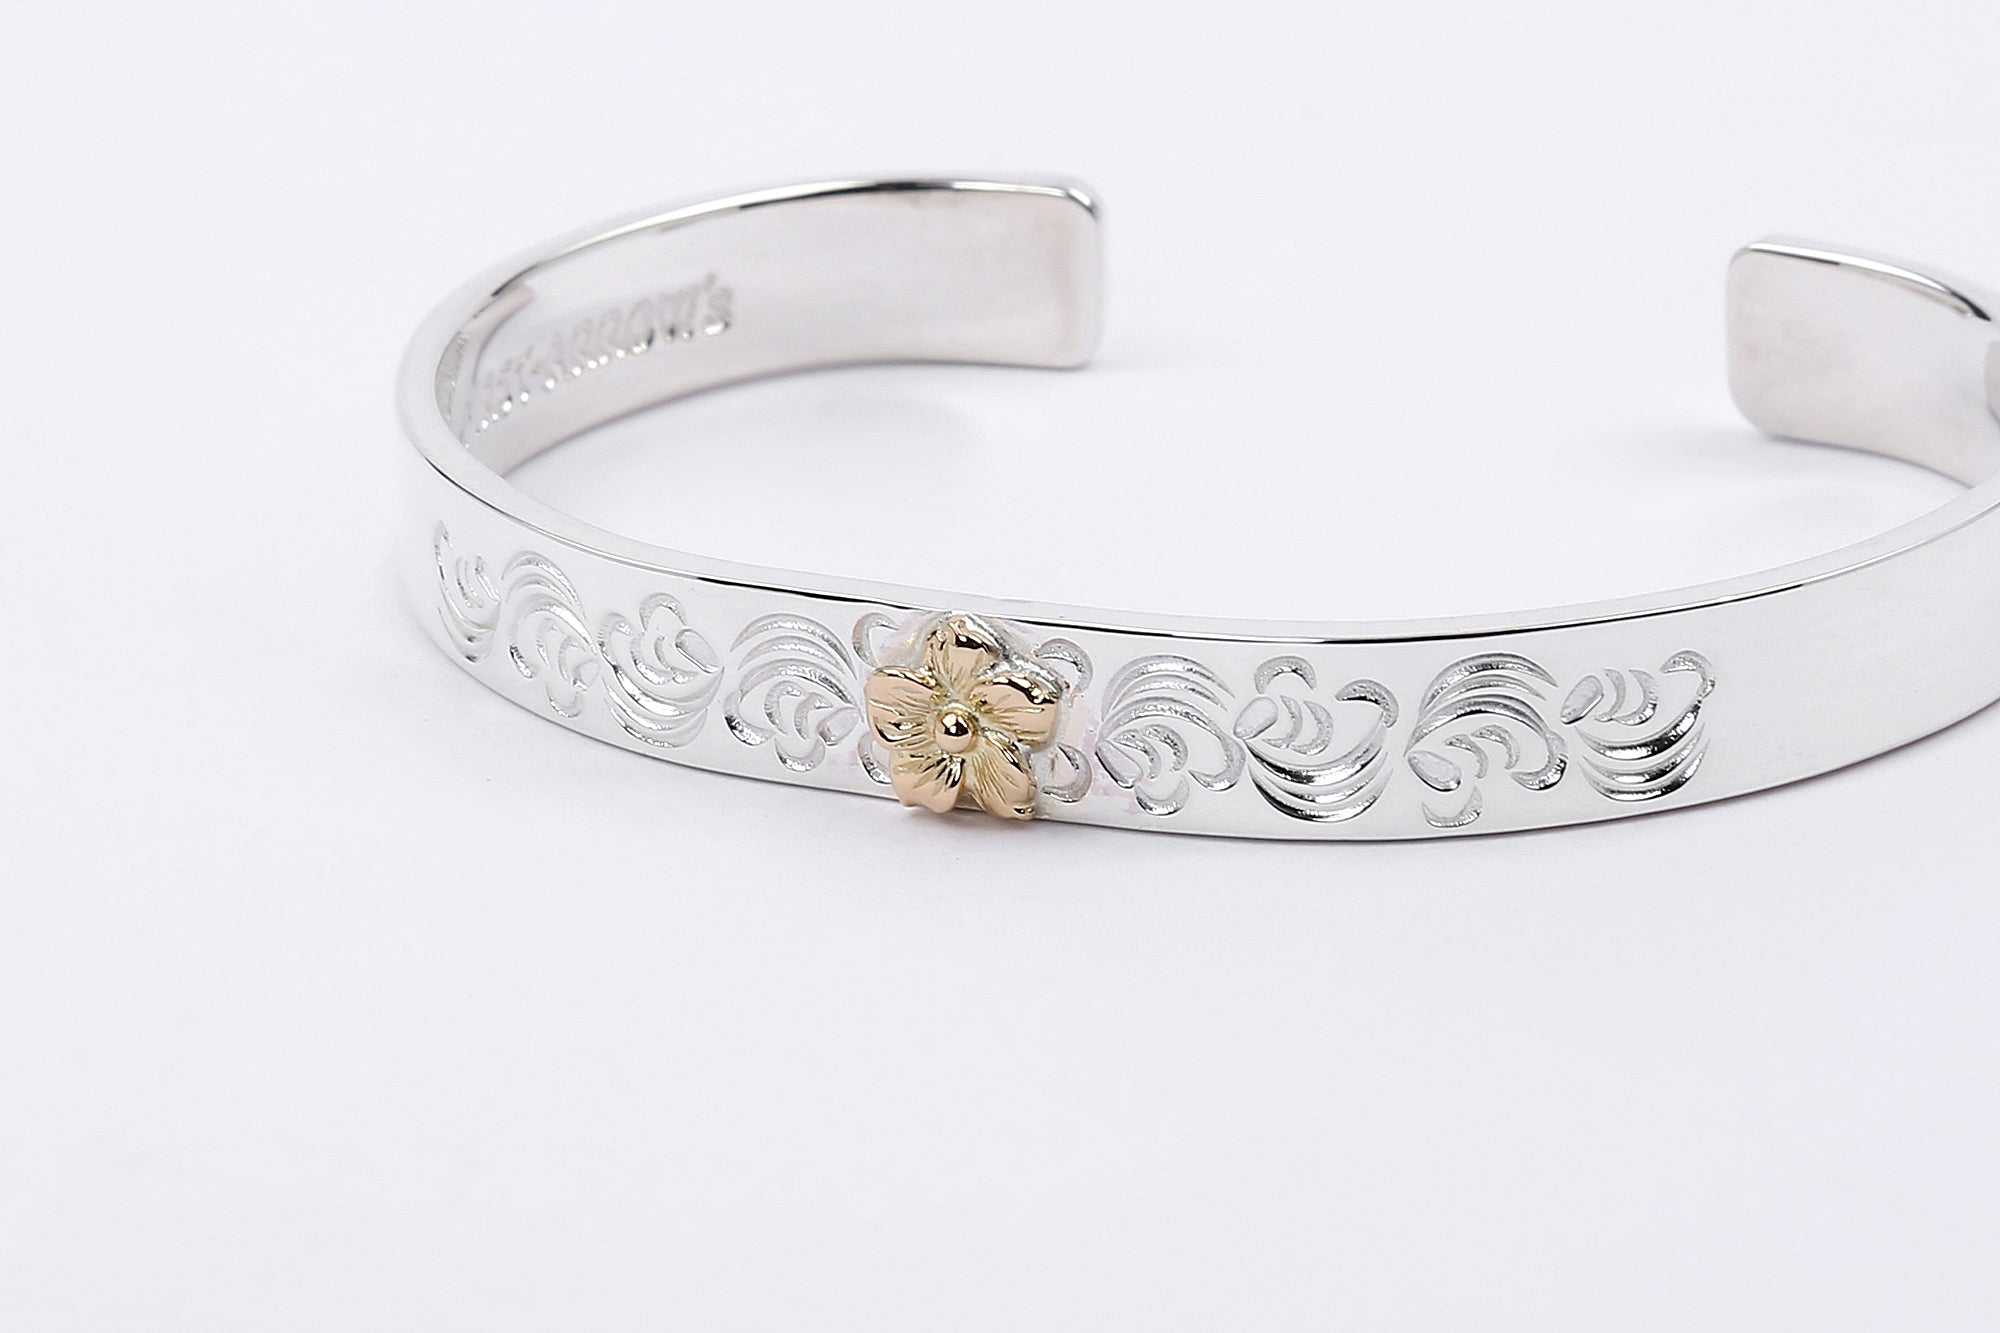 First Arrow’s '18k Gold Flower With Arabesque’ 8mm Bangle